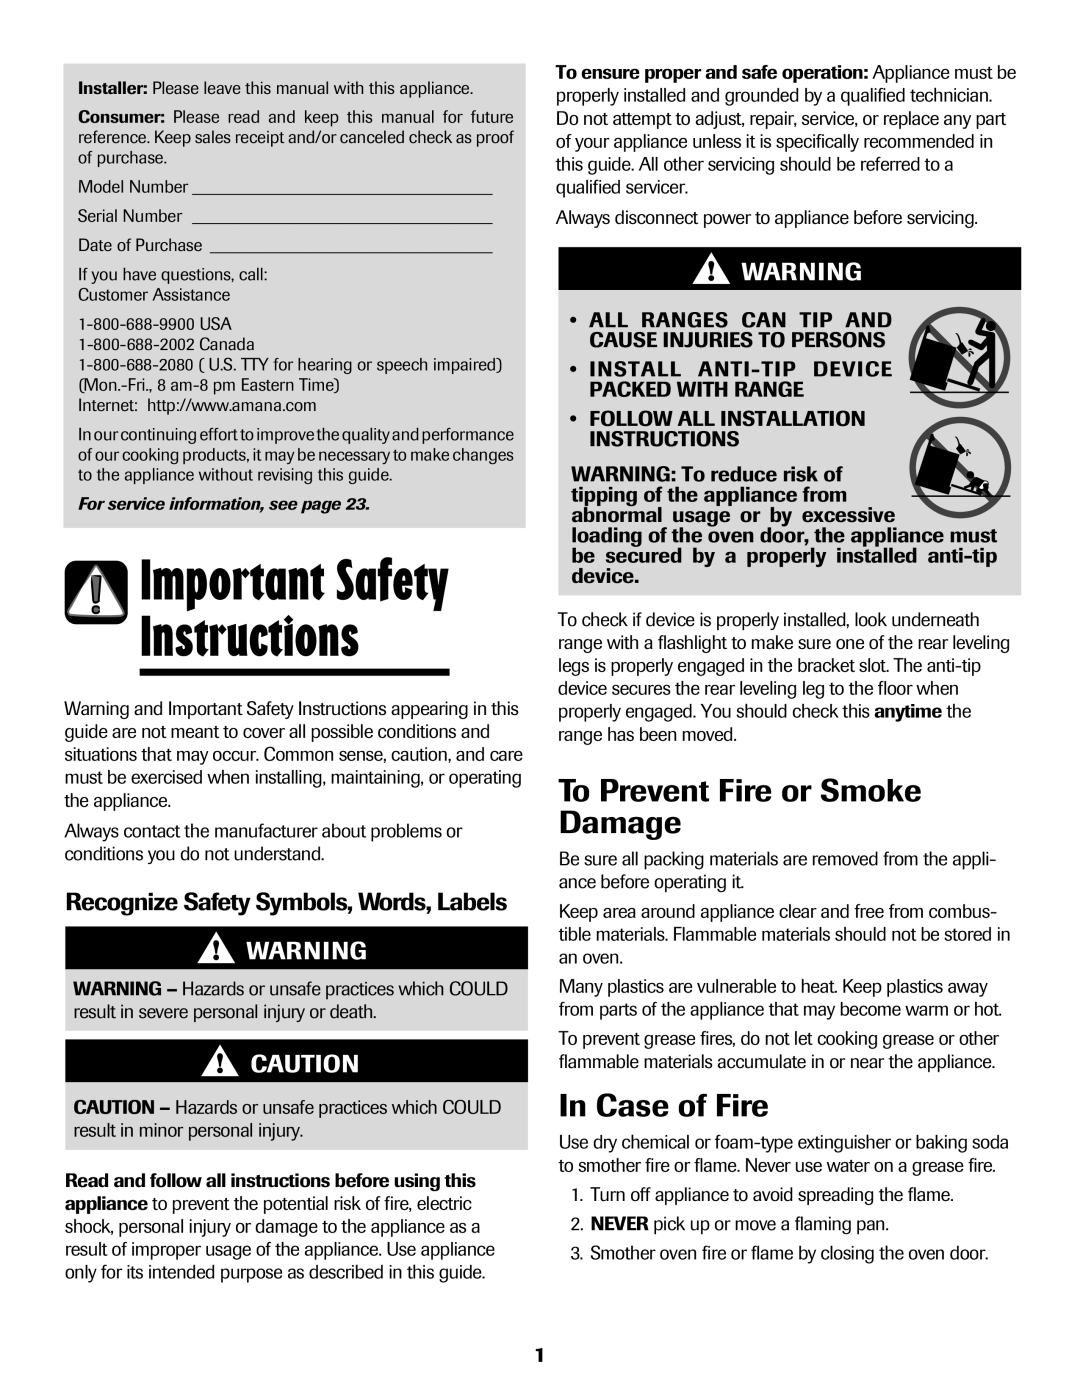 Amana Coil important safety instructions Instructions, Important Safety, To Prevent Fire or Smoke Damage, In Case of Fire 